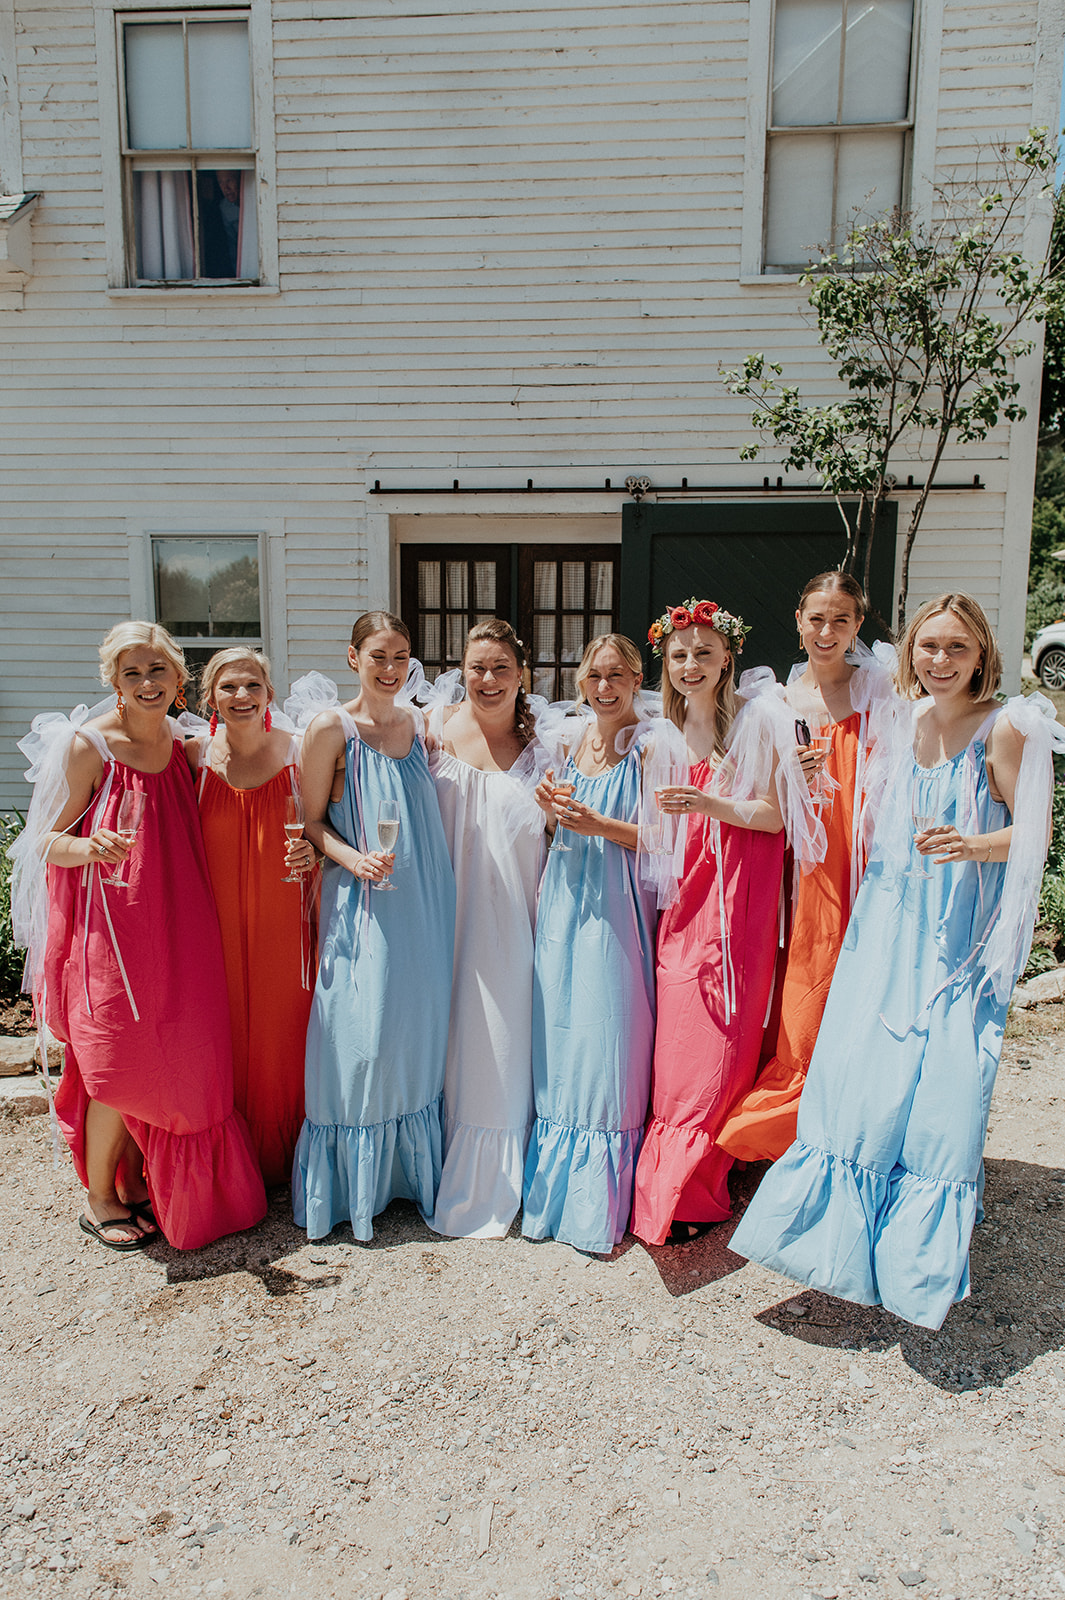 Bride standing with bridesmaids outside